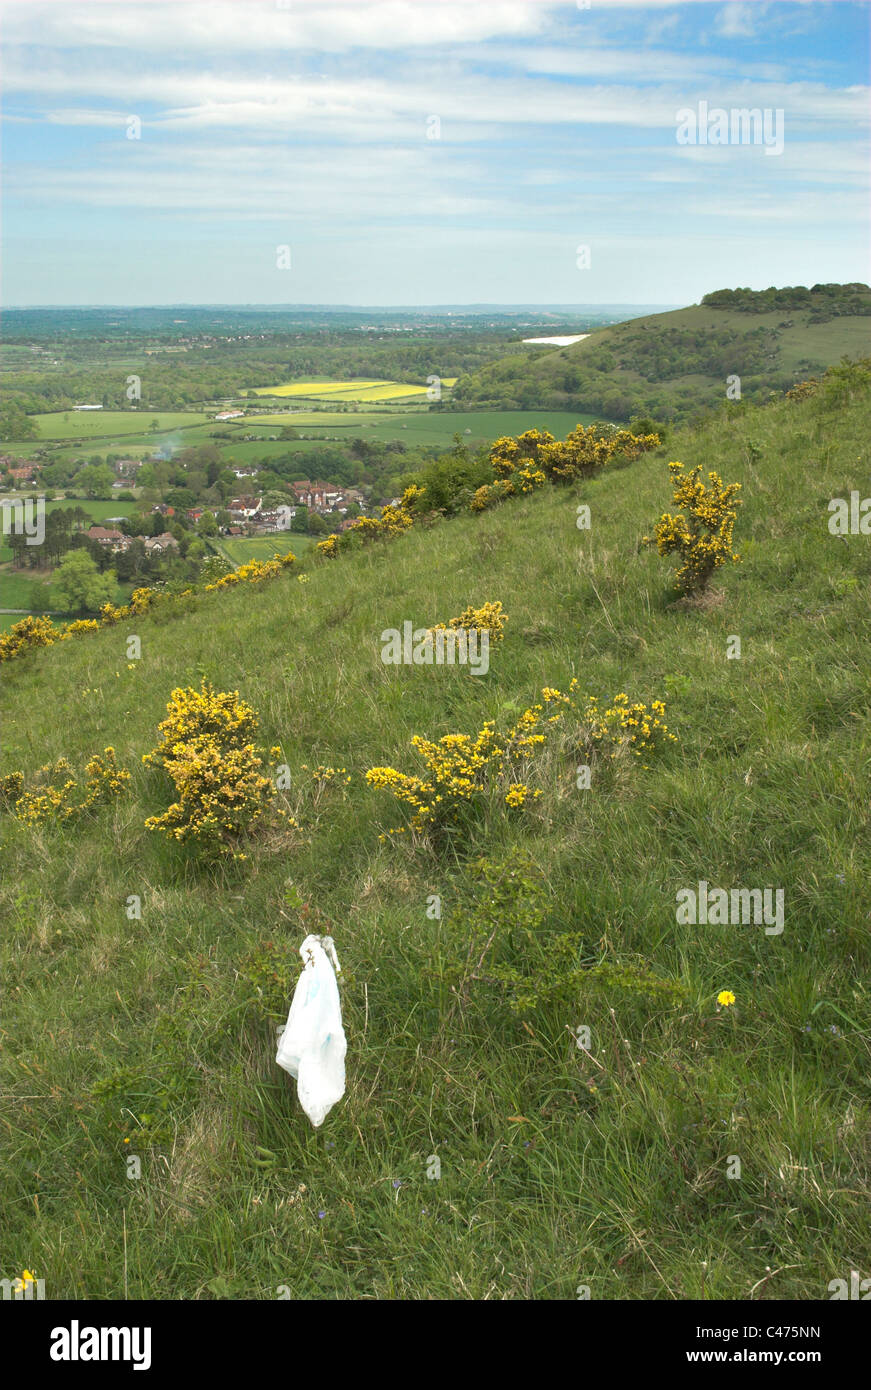 Rubbish left on the South Downs above the village of Poynings in the South Downs National Park. Stock Photo